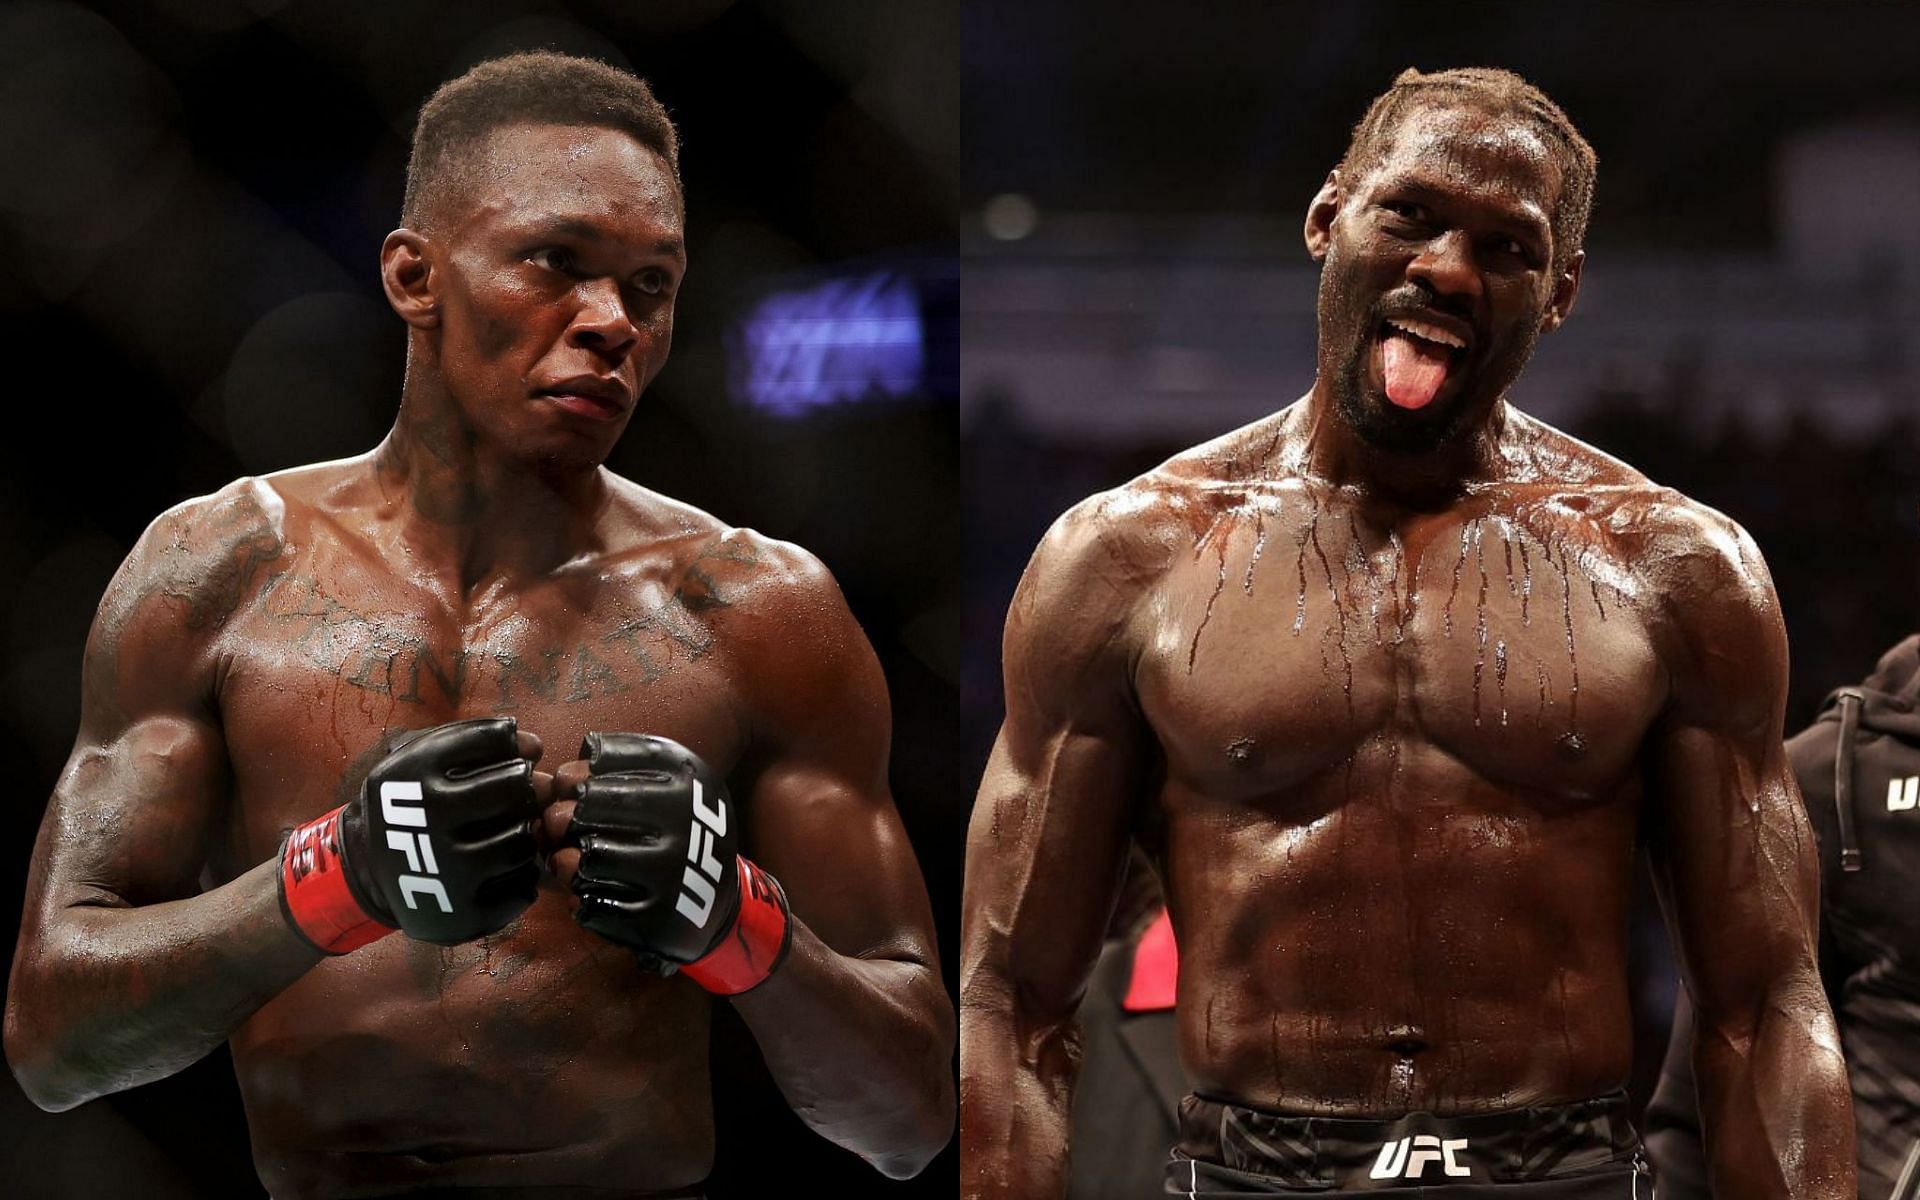 Israel Adesanya has given his thoughts on an impending match-up with Jared Cannonier